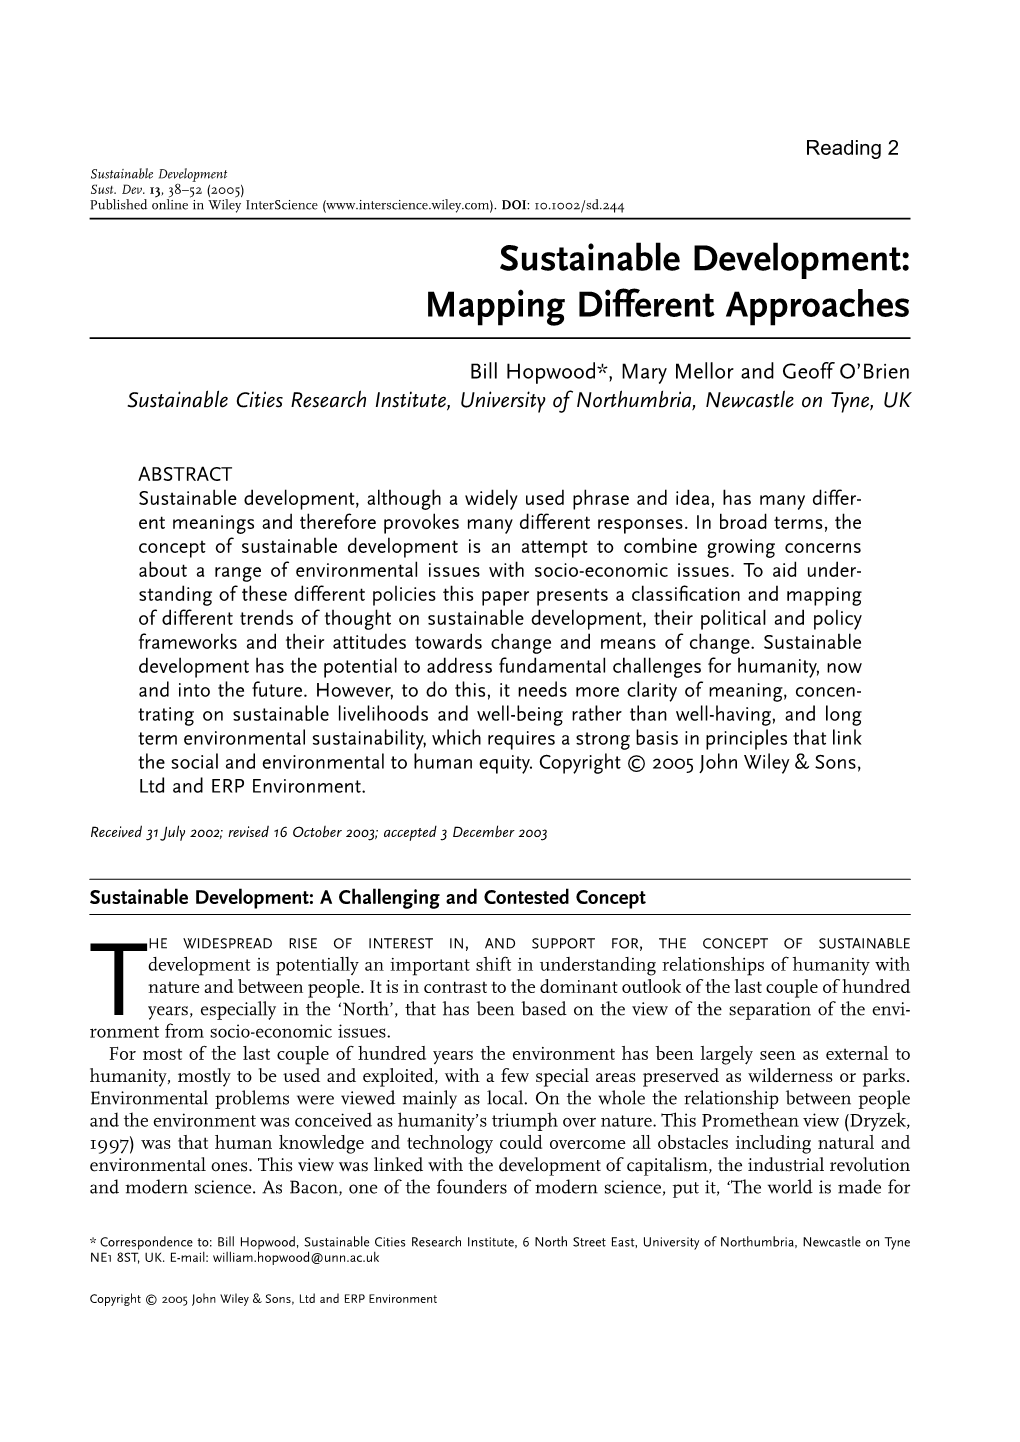 Sustainable Development: Mapping Different Approaches